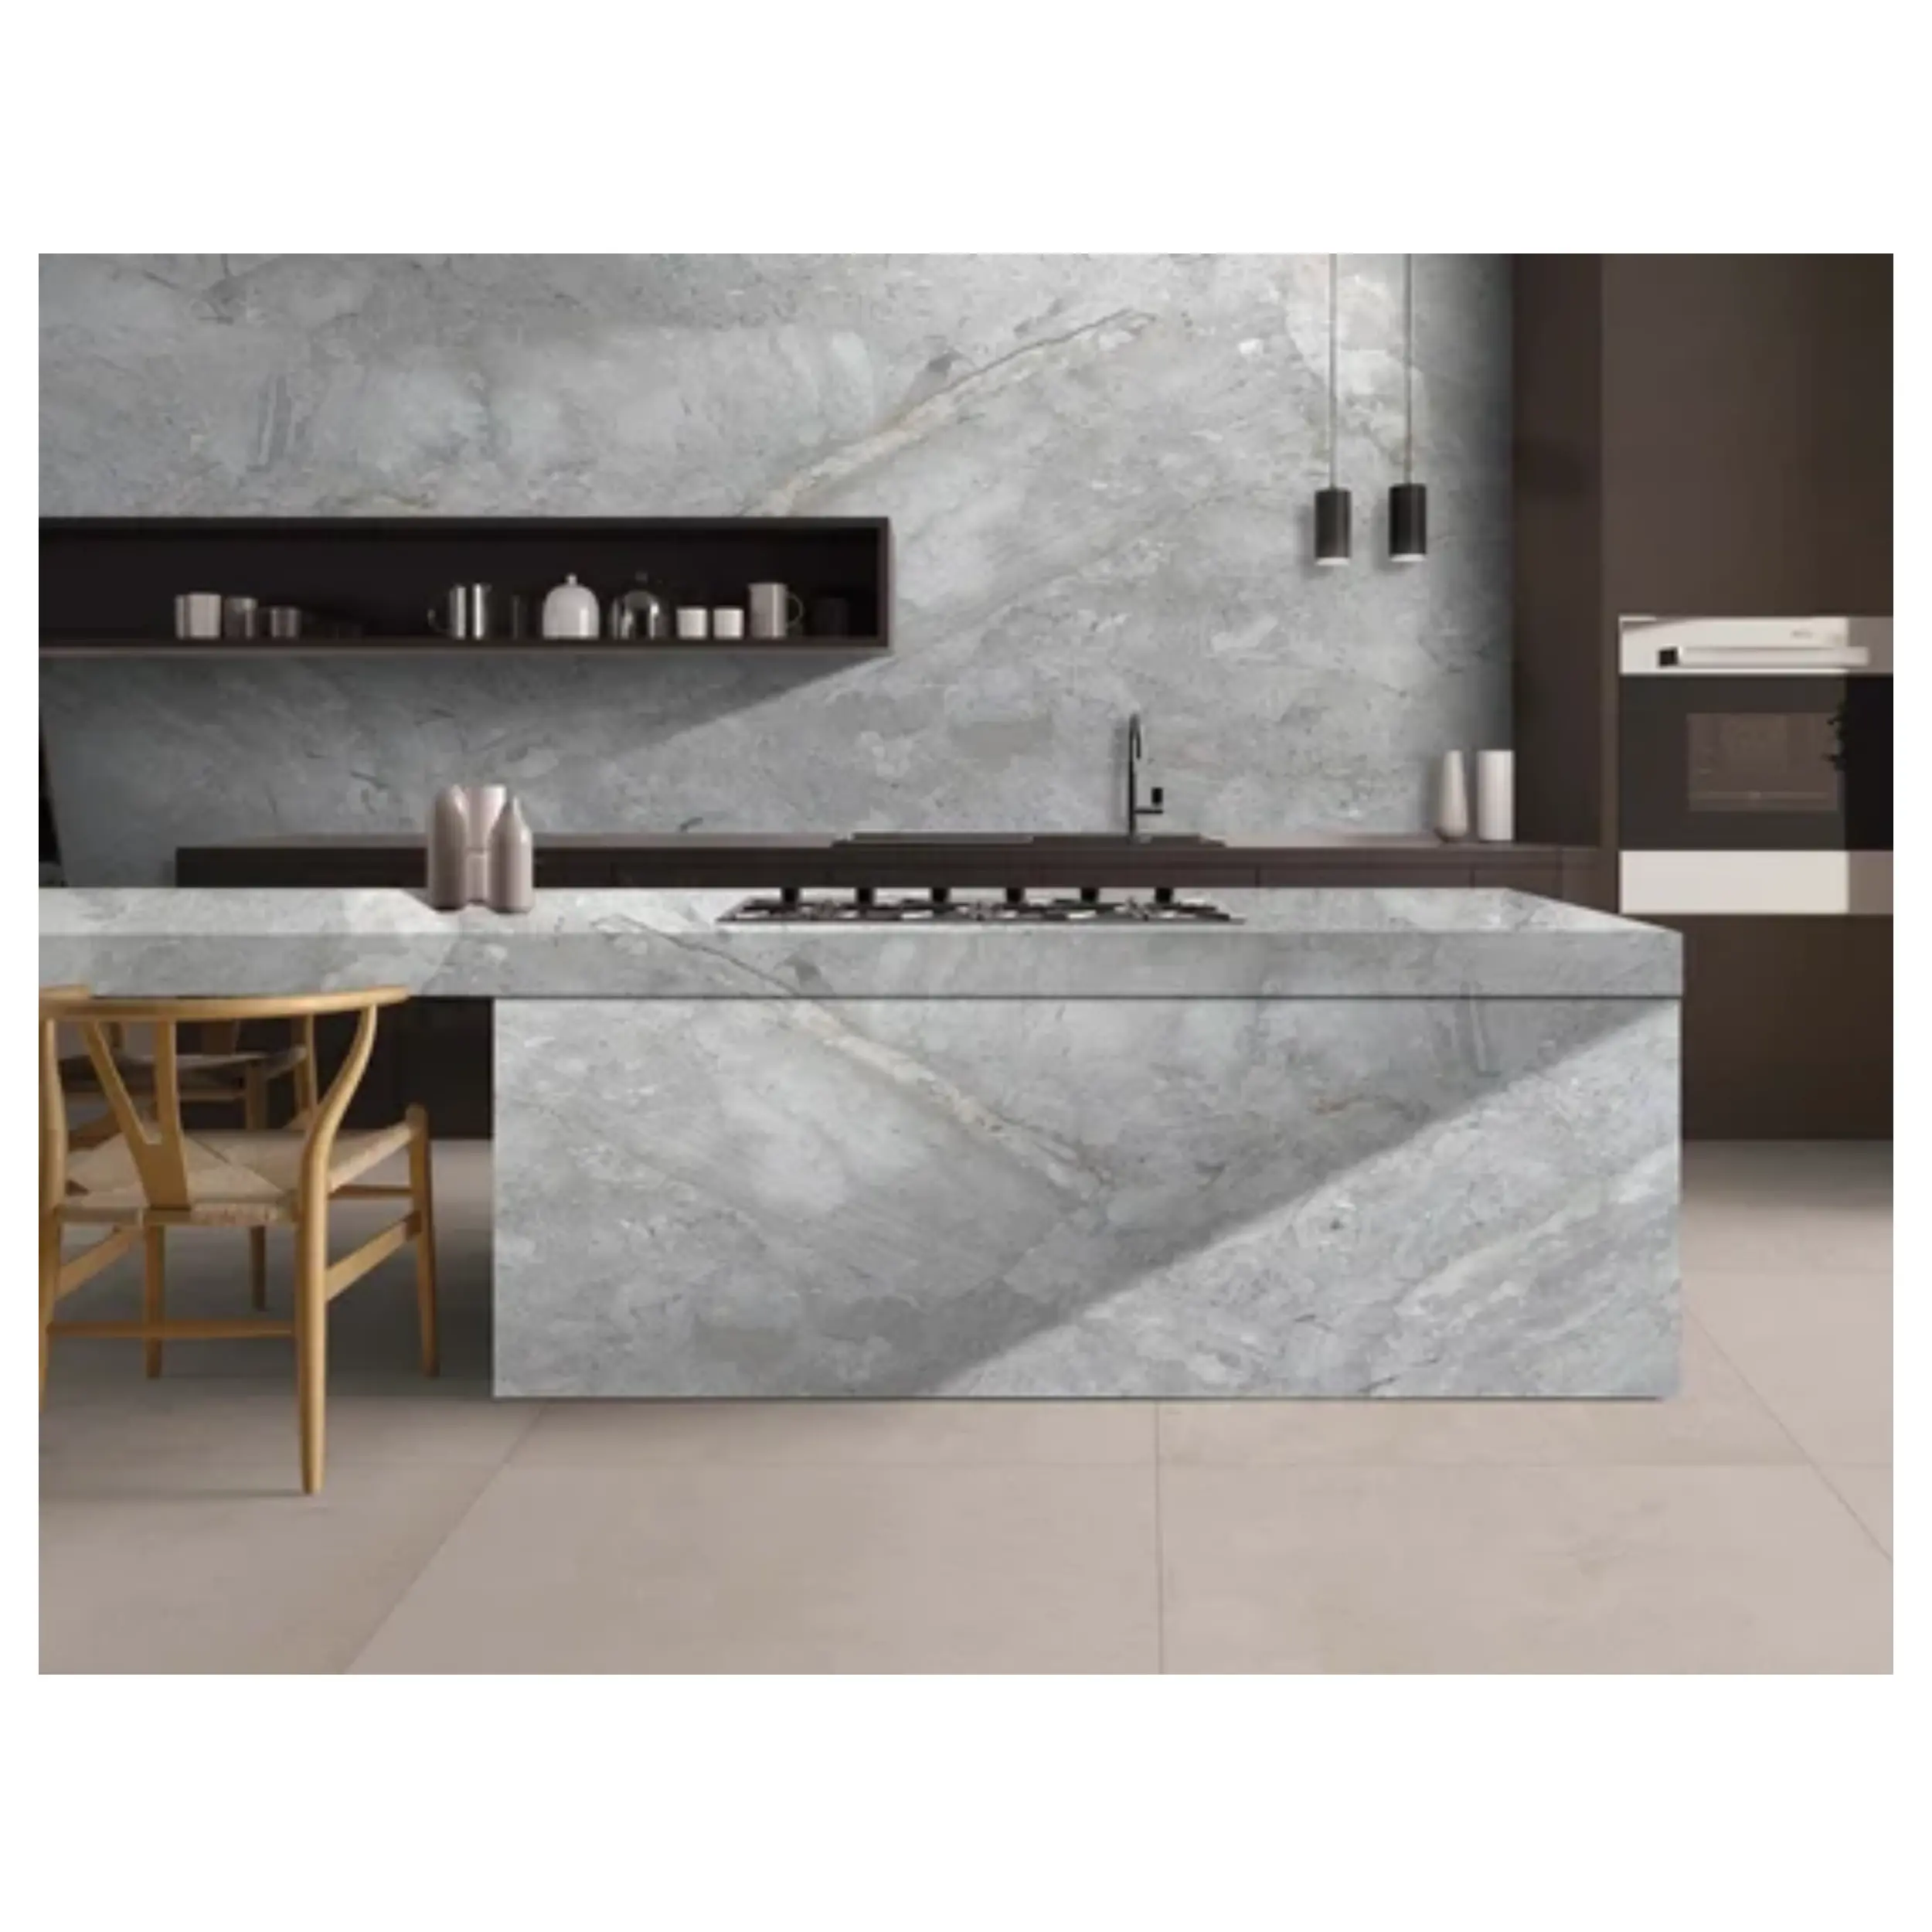 Italian Ice Gray Marble for Bathroom Kitchen Countertops Cladding Wall Stone Building Materials